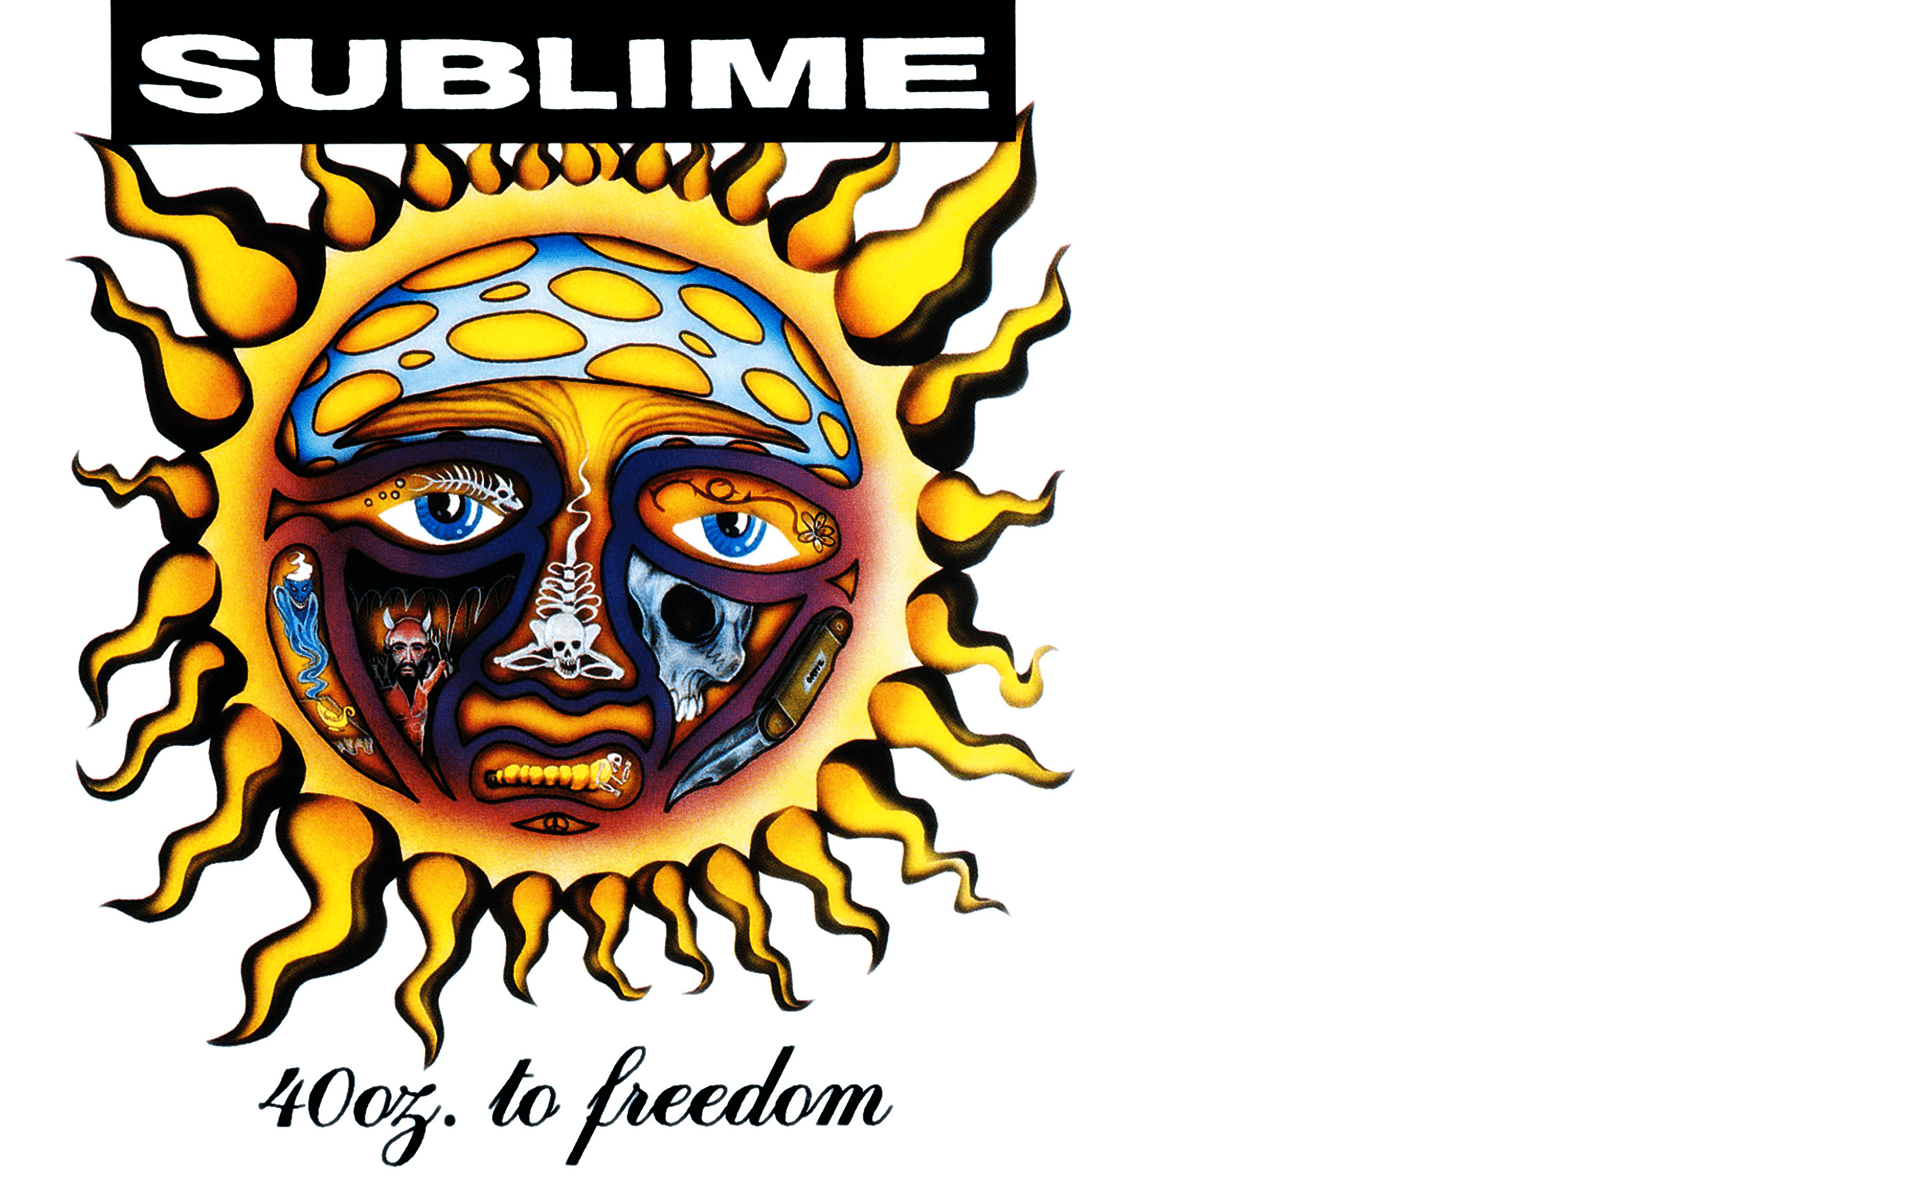 free sublime mp3